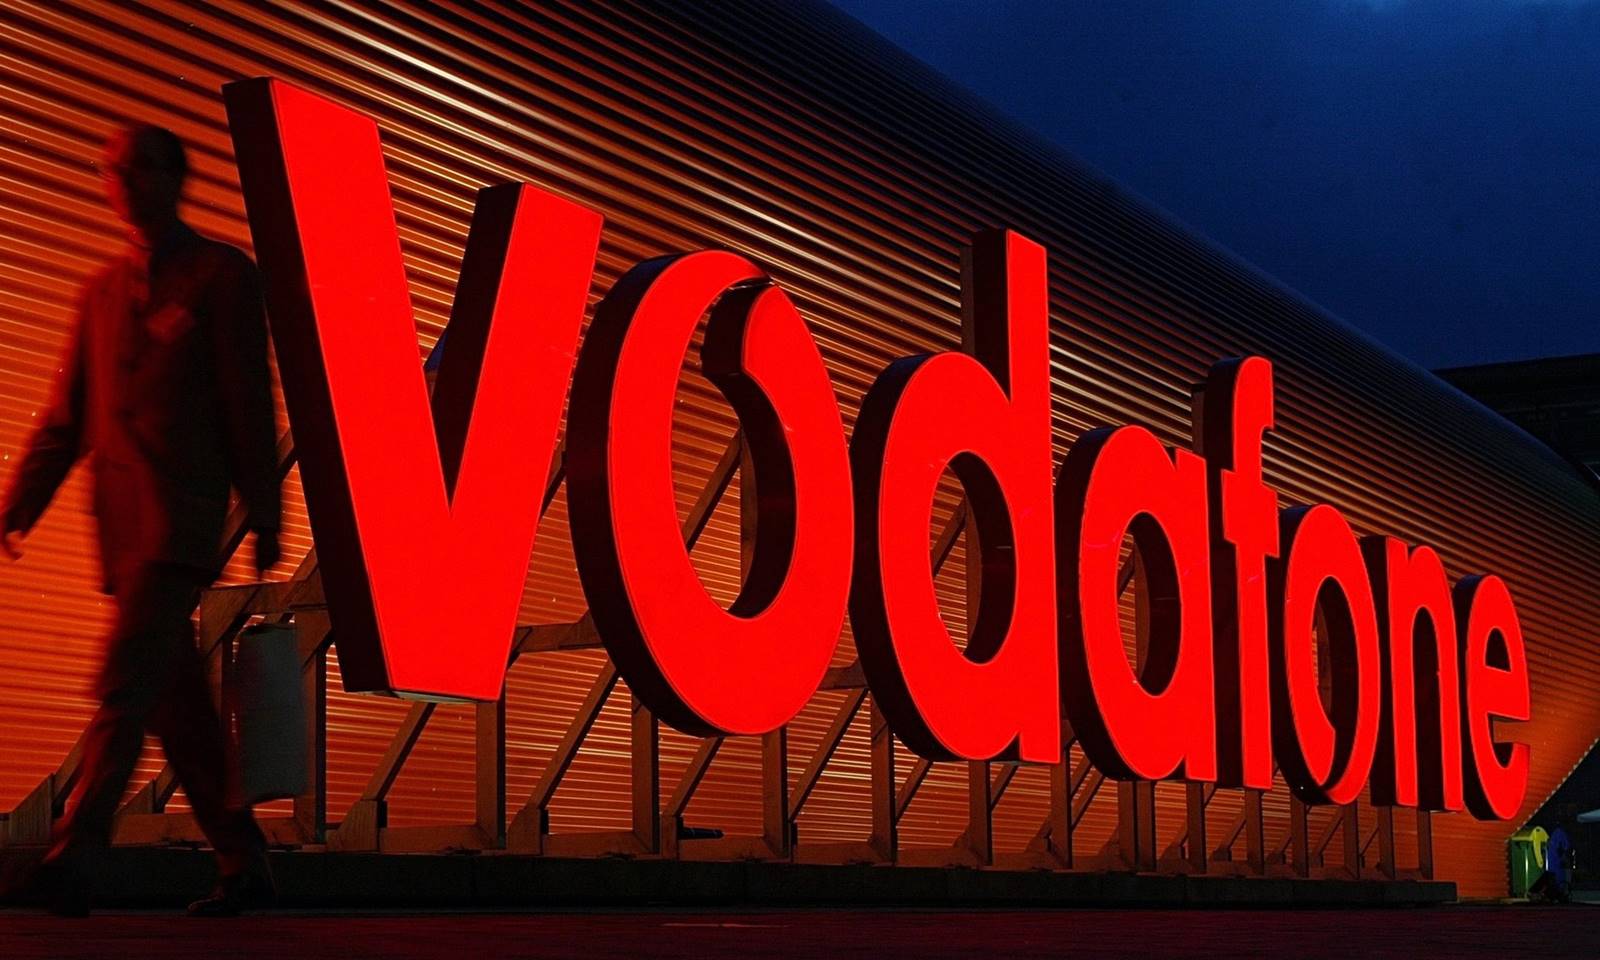 Vodafone. On July 26th you have these GREAT Discounts on Phones Online only